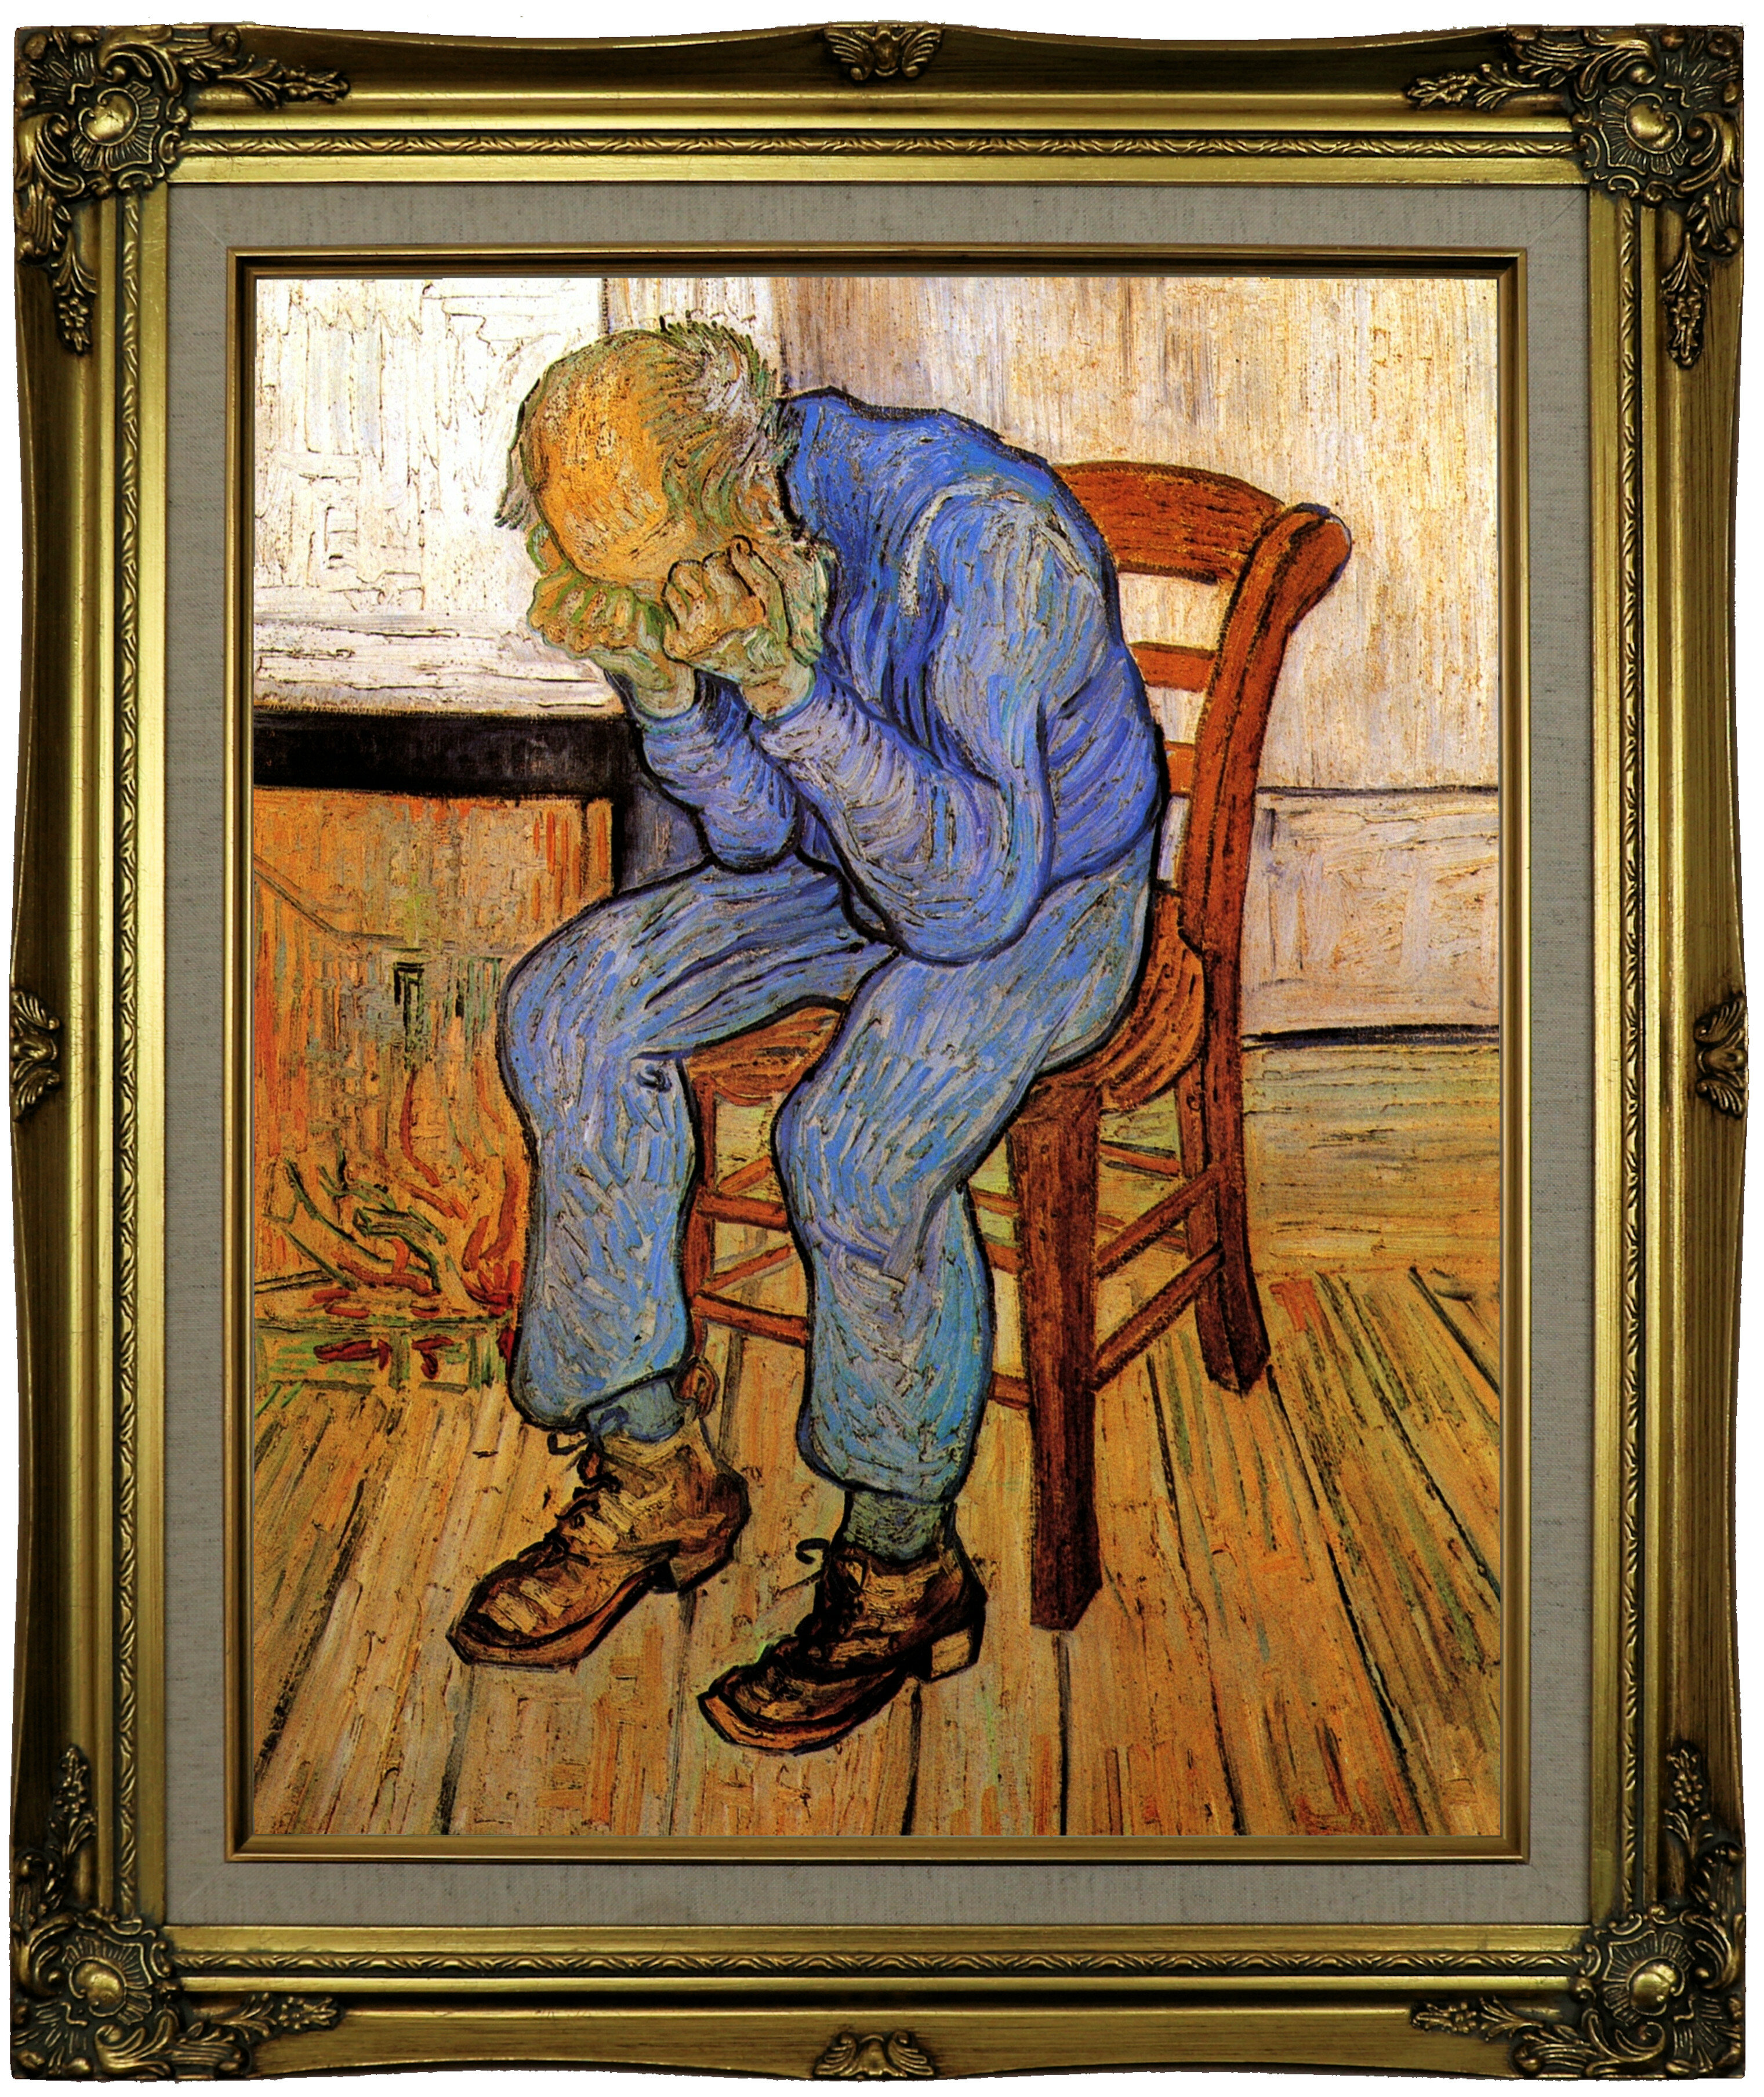 On the Threshold of Eternity Oil painting Vincent Van Gogh Old Man in Sorrow